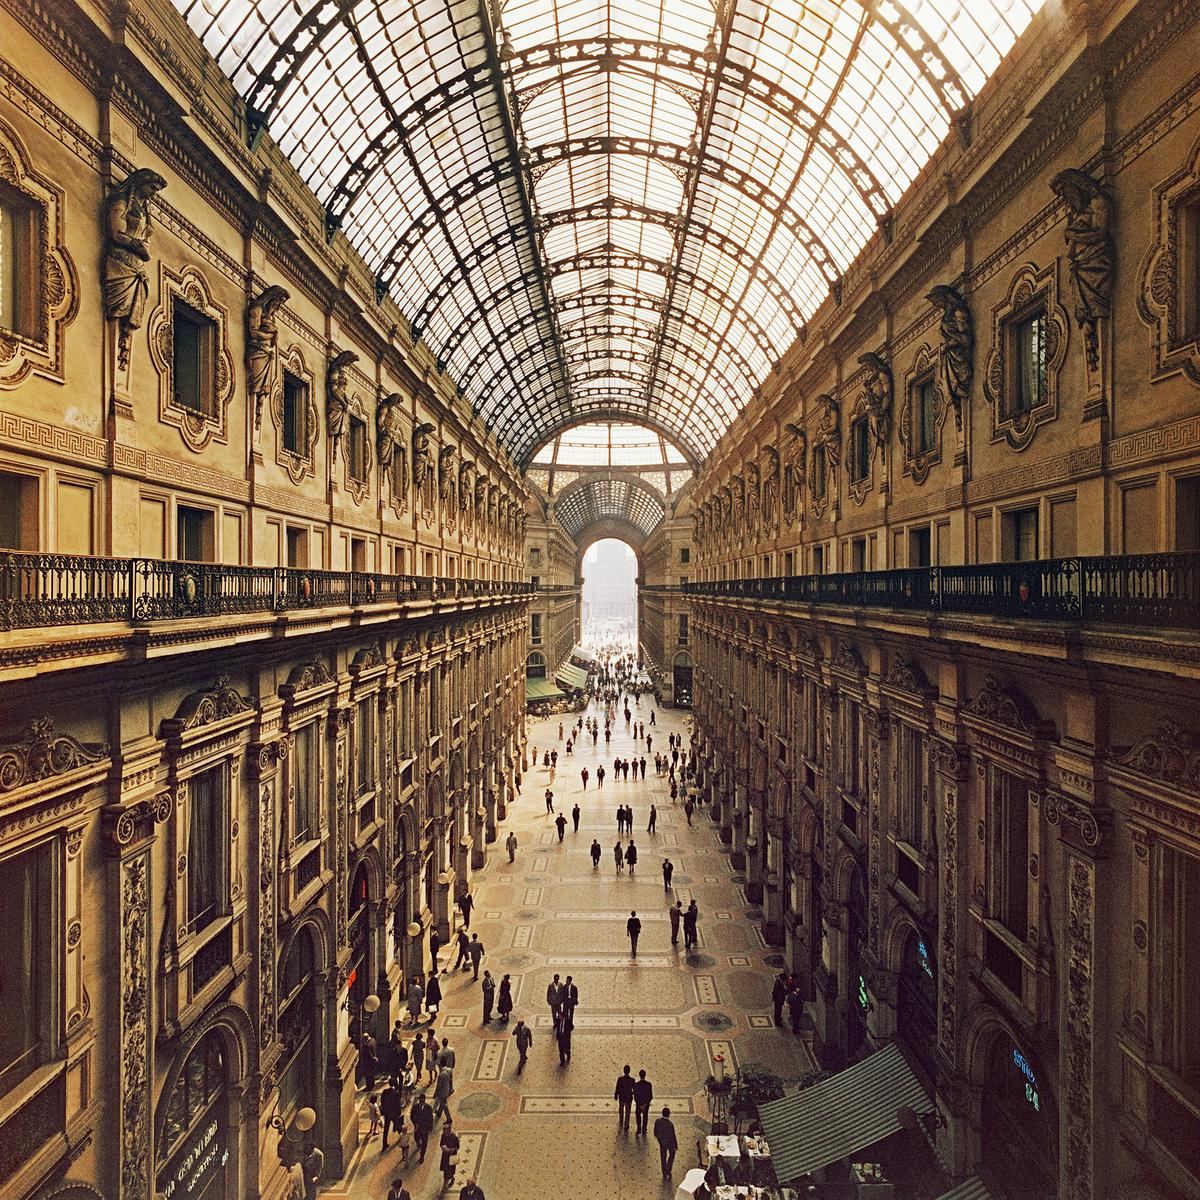 'Galleria Vittorio Emanuele II' 1960 - Slim Aarons Limited Edition Estate Stamped
View looking down the Galleria Vittorio Emanuele II in Milan, Italy, 1960. Opened in 1890, the covered arcade is on the northern side of the Piazza del